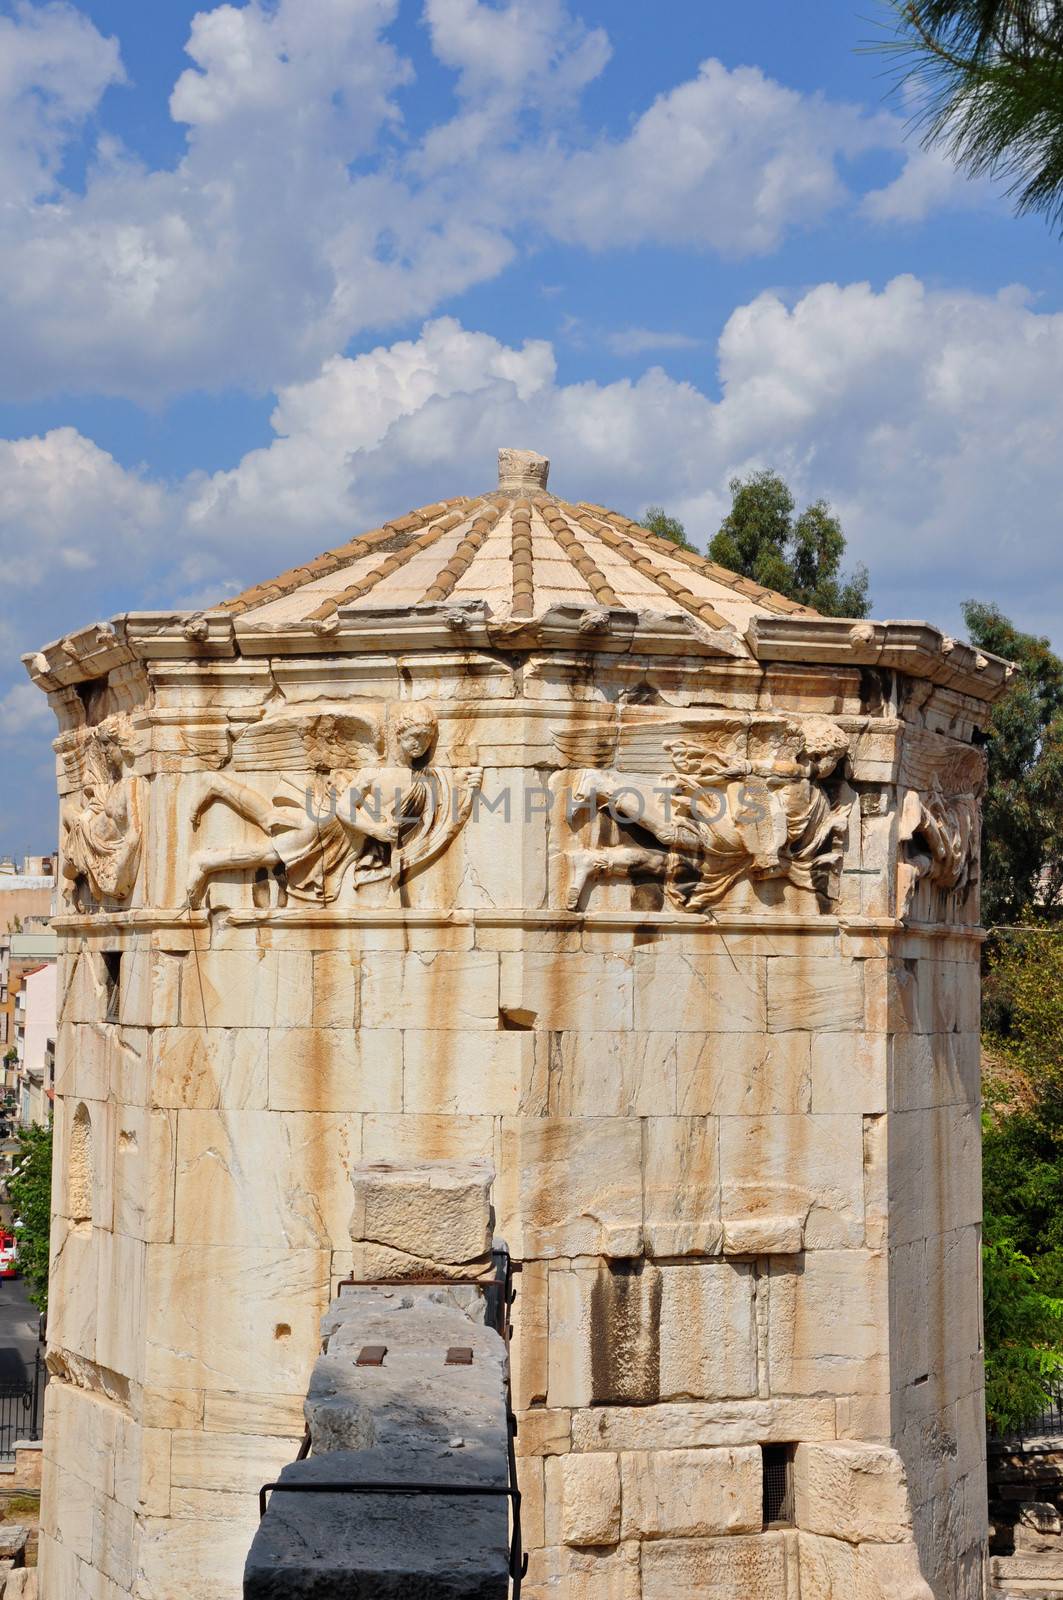 Tower of the winds ancient clocktower for monitoring weather and time later a church. Wind gods carved on marble frieze, Athens Greece.